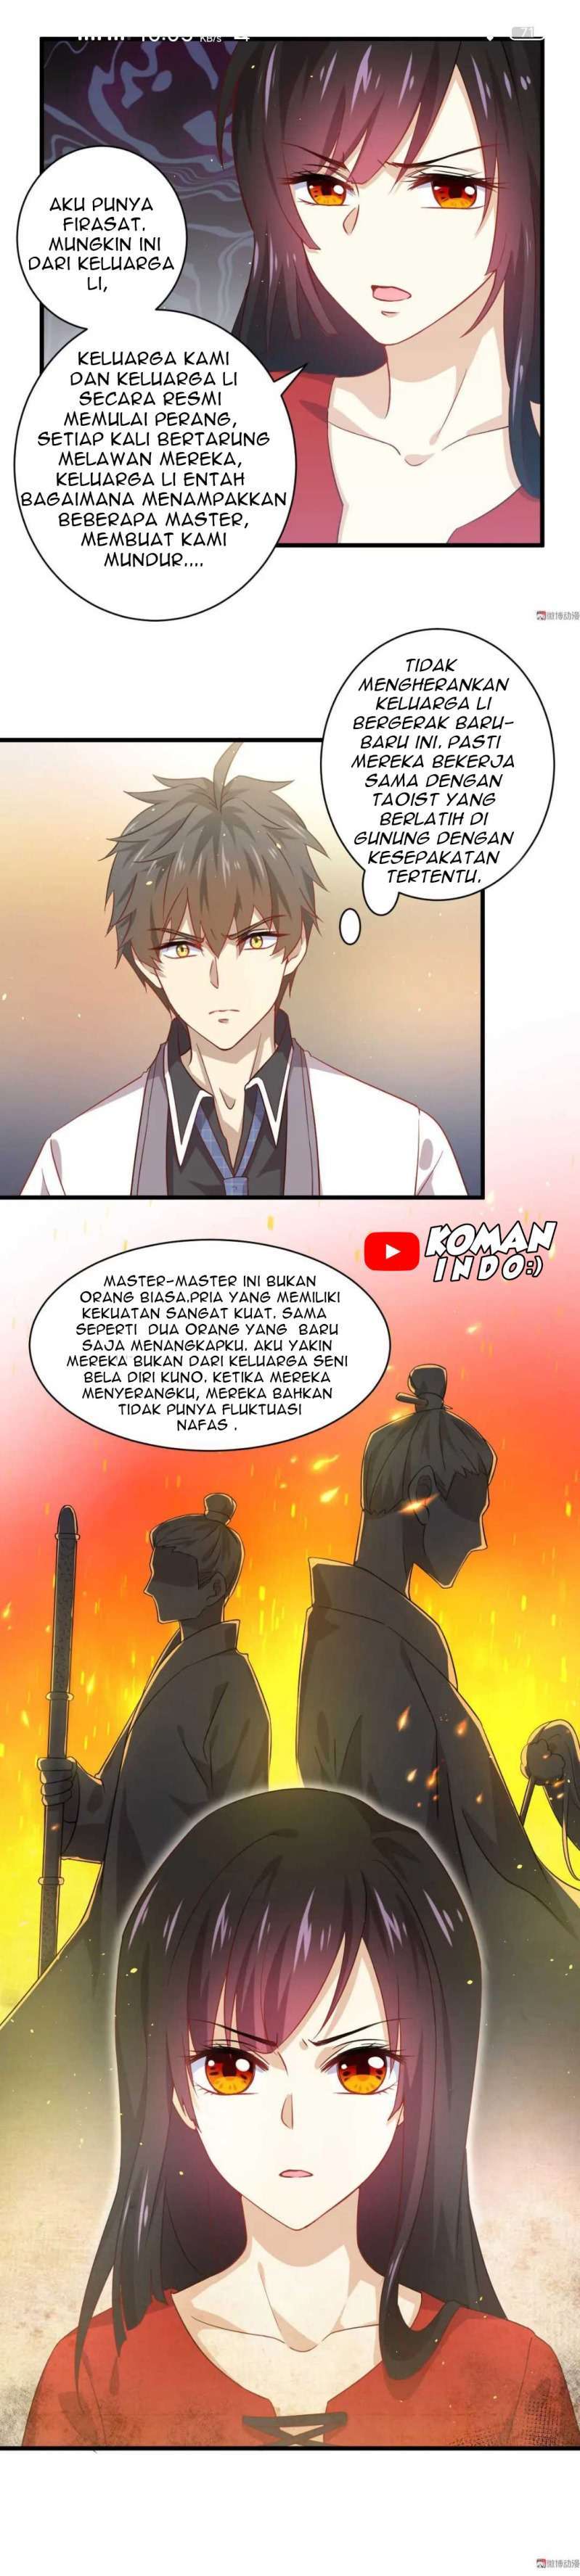 Immortal Swordsman in The Reverse World Chapter 27 4